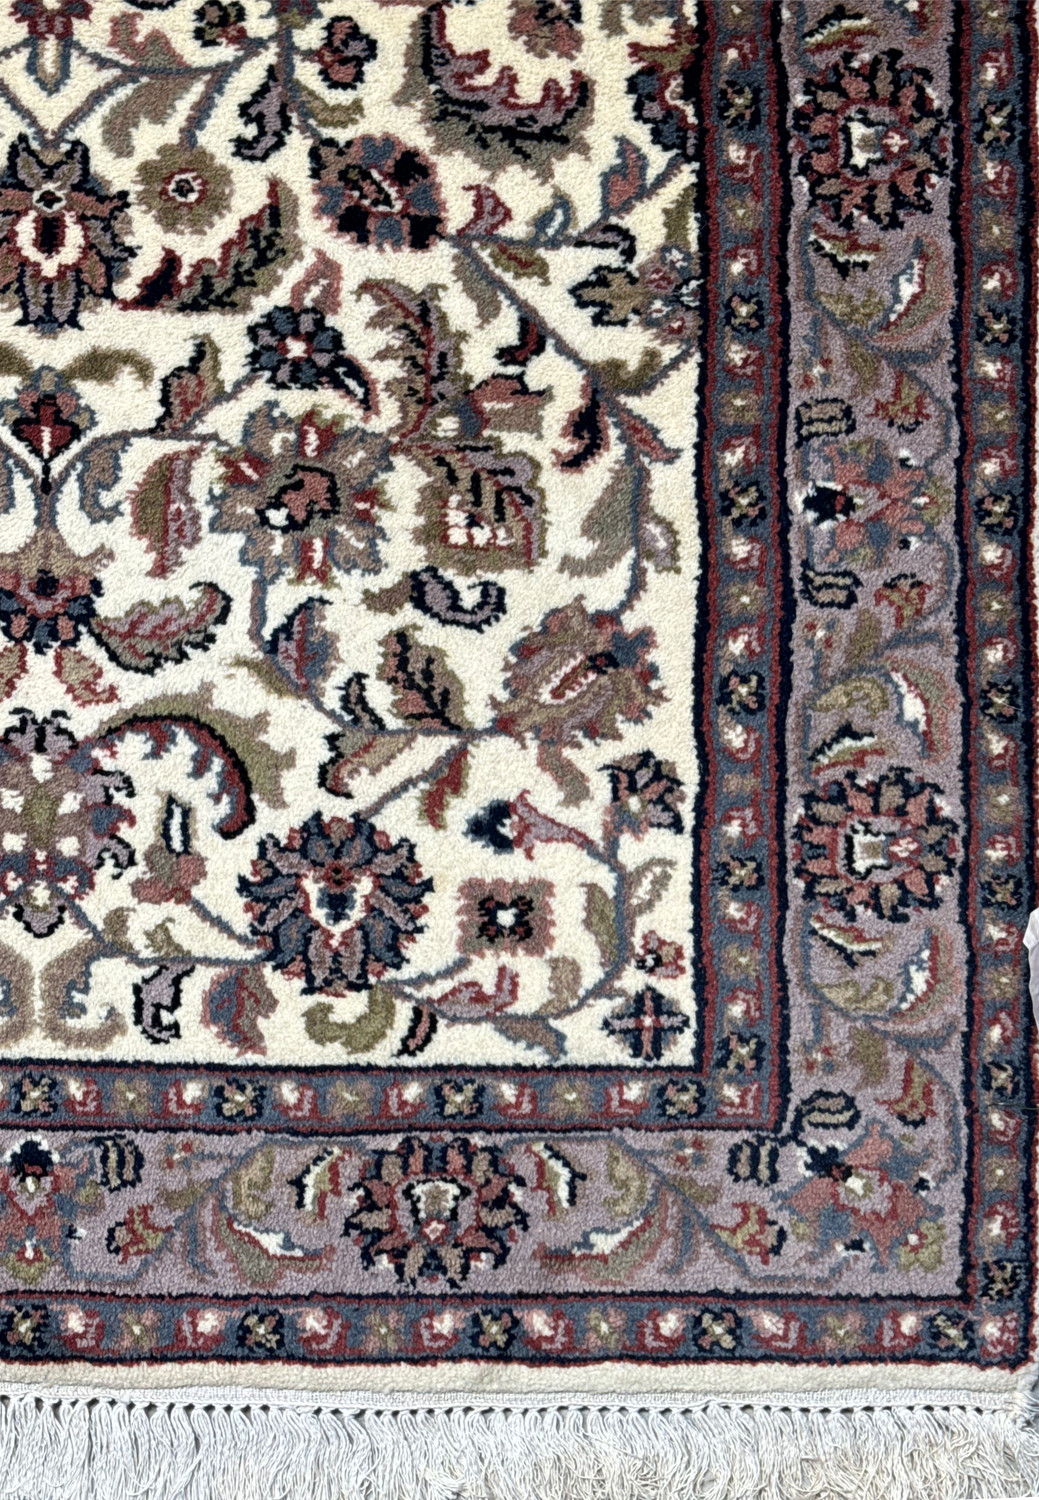 Zoomed-in view of a 3x5 Tabriz Oriental rug highlighting the dense weave and pattern consistency